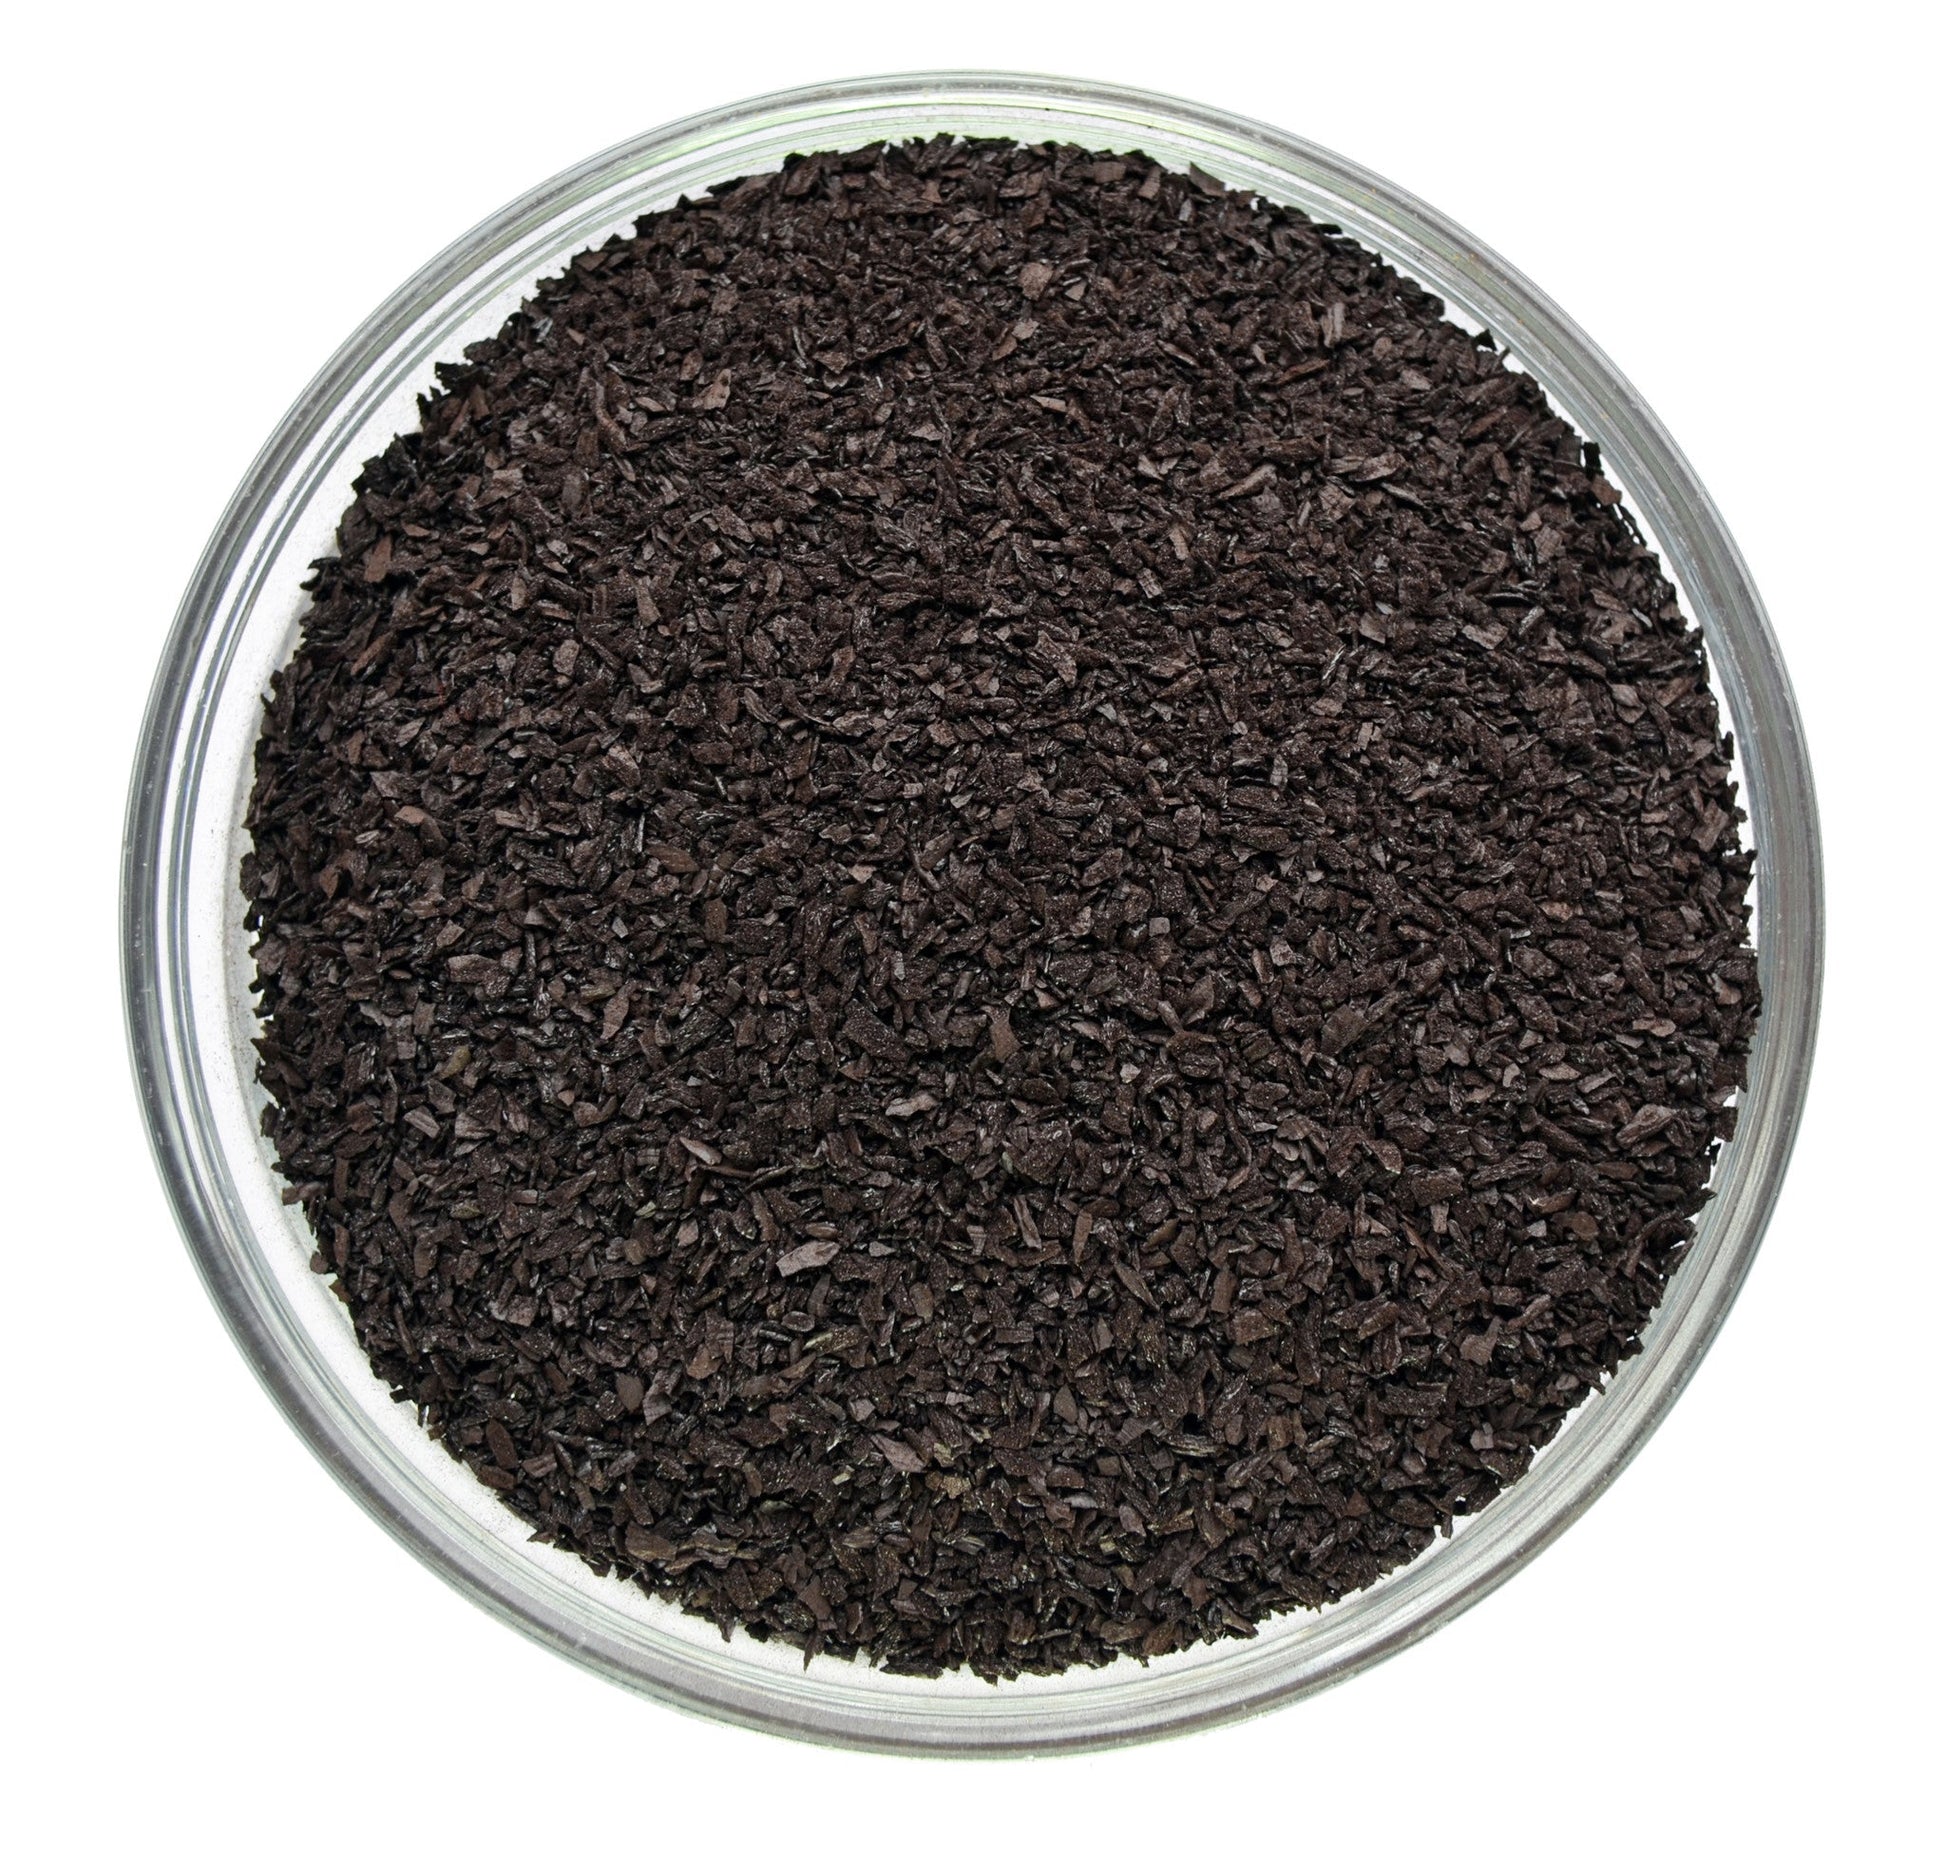 Soluble Kelp Powder - Seaweed Products - The Seed Supply - 1